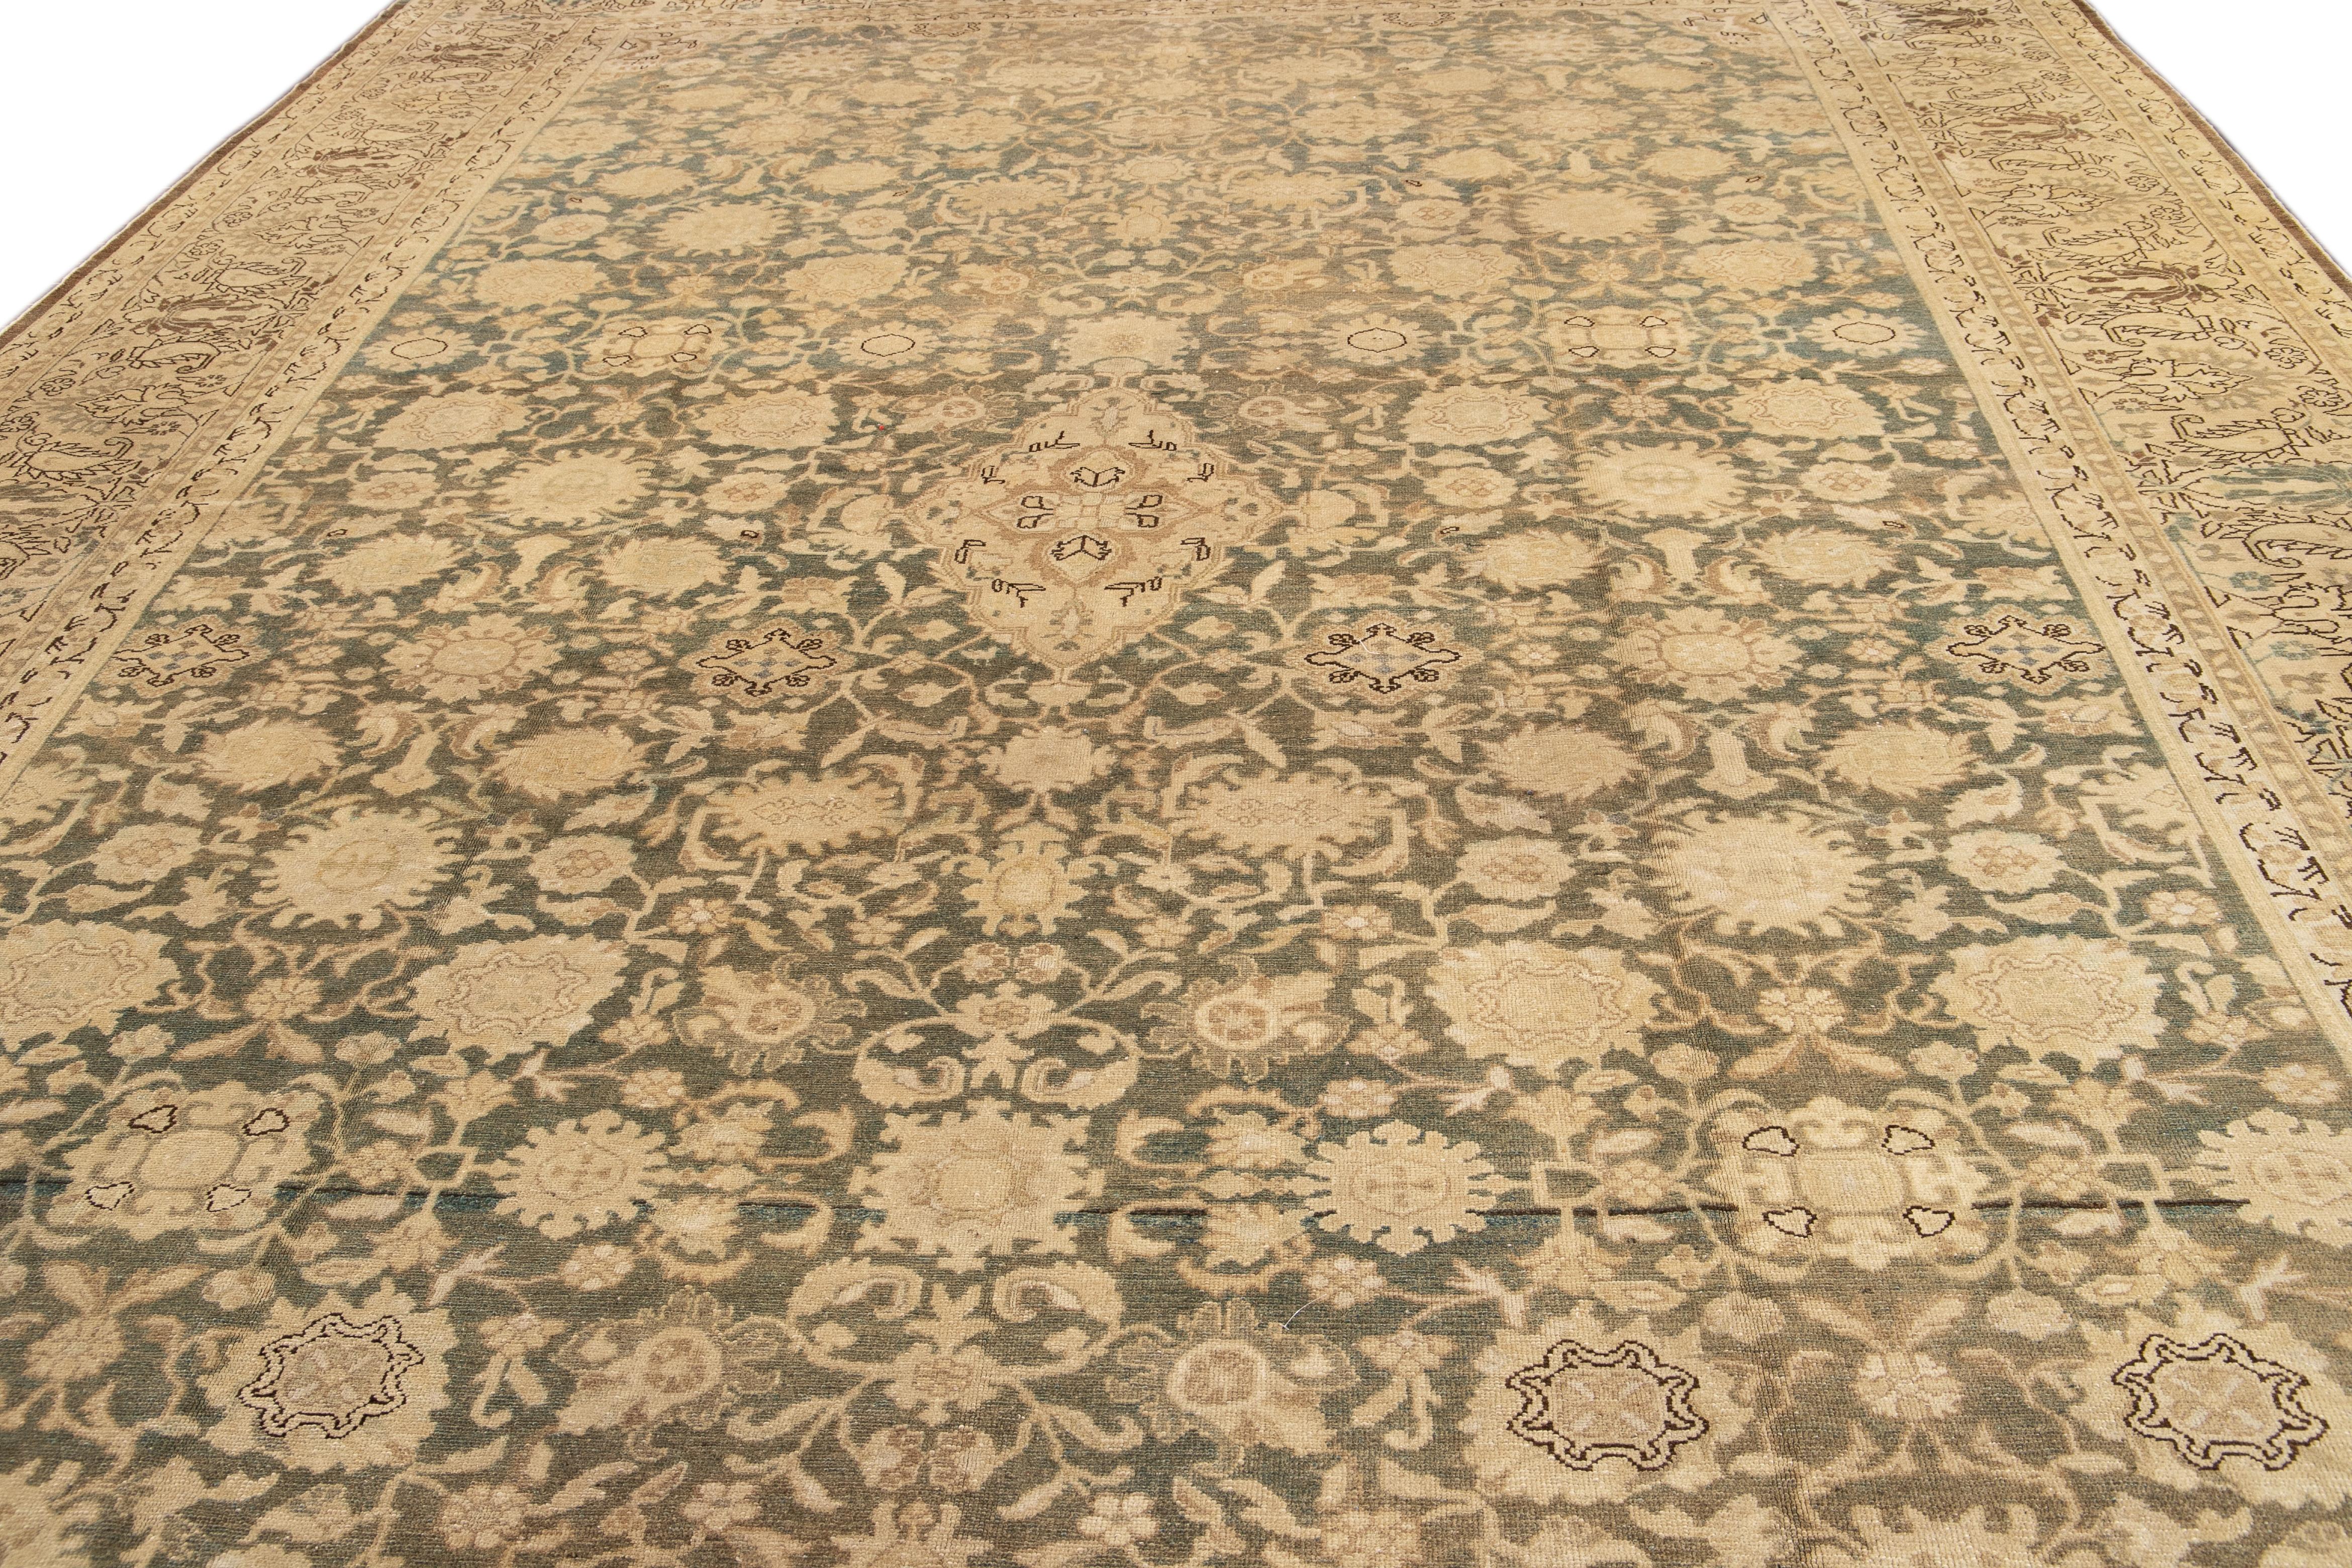 This stunning antique Persian Malayer rug is fashioned from meticulously hand-knotted wool, featuring a serene gray field adorned with ivory and tan accents in an exquisite all-over classic design.

This rug measures 12' 4